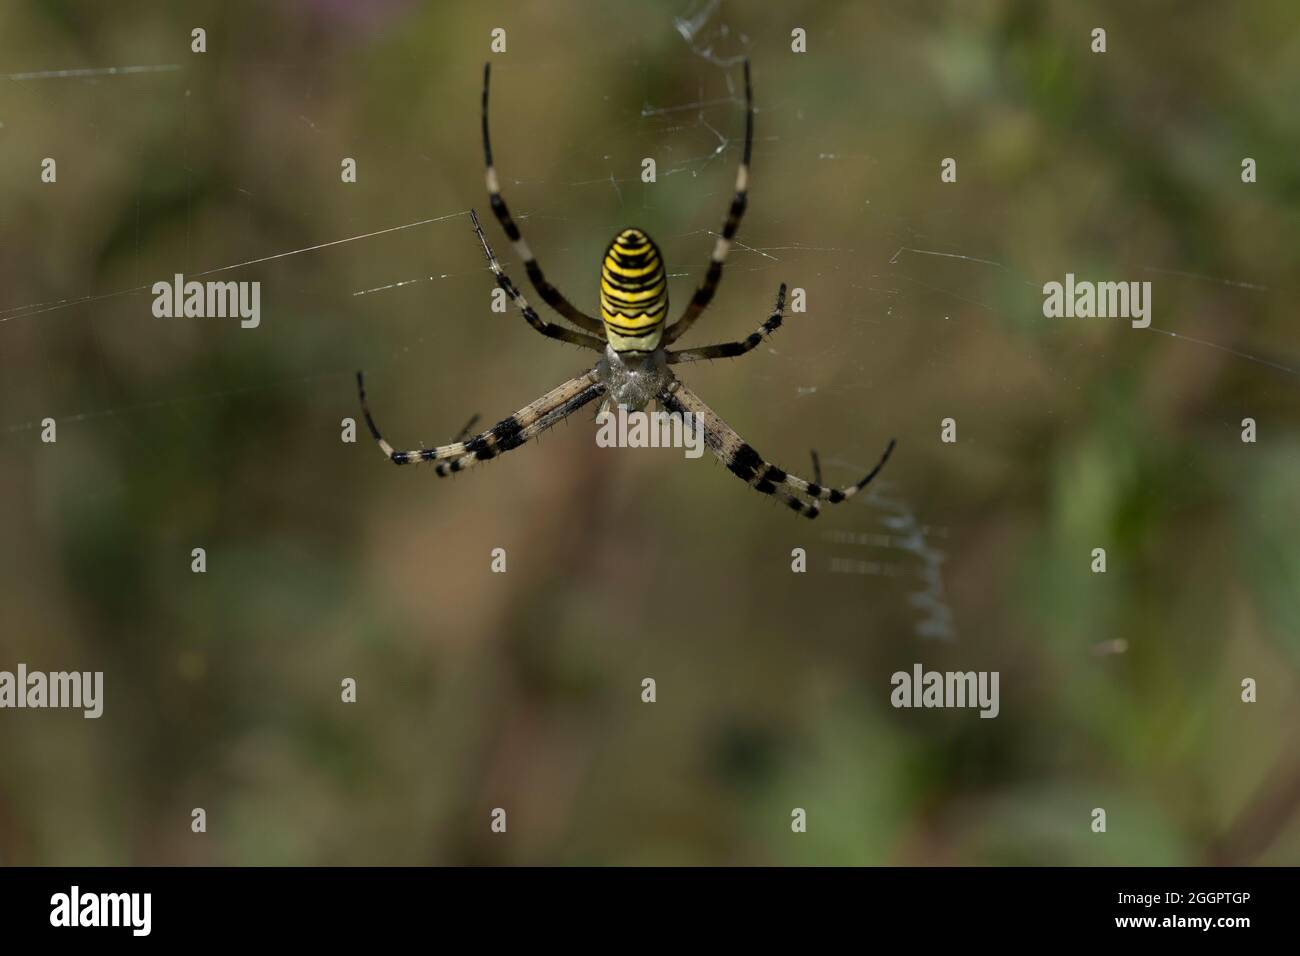 The spider species Argiope aurantia is commonly known as the yellow garden spider,[2][3] black and yellow garden spider,[4] golden garden spider,[5] w Stock Photo